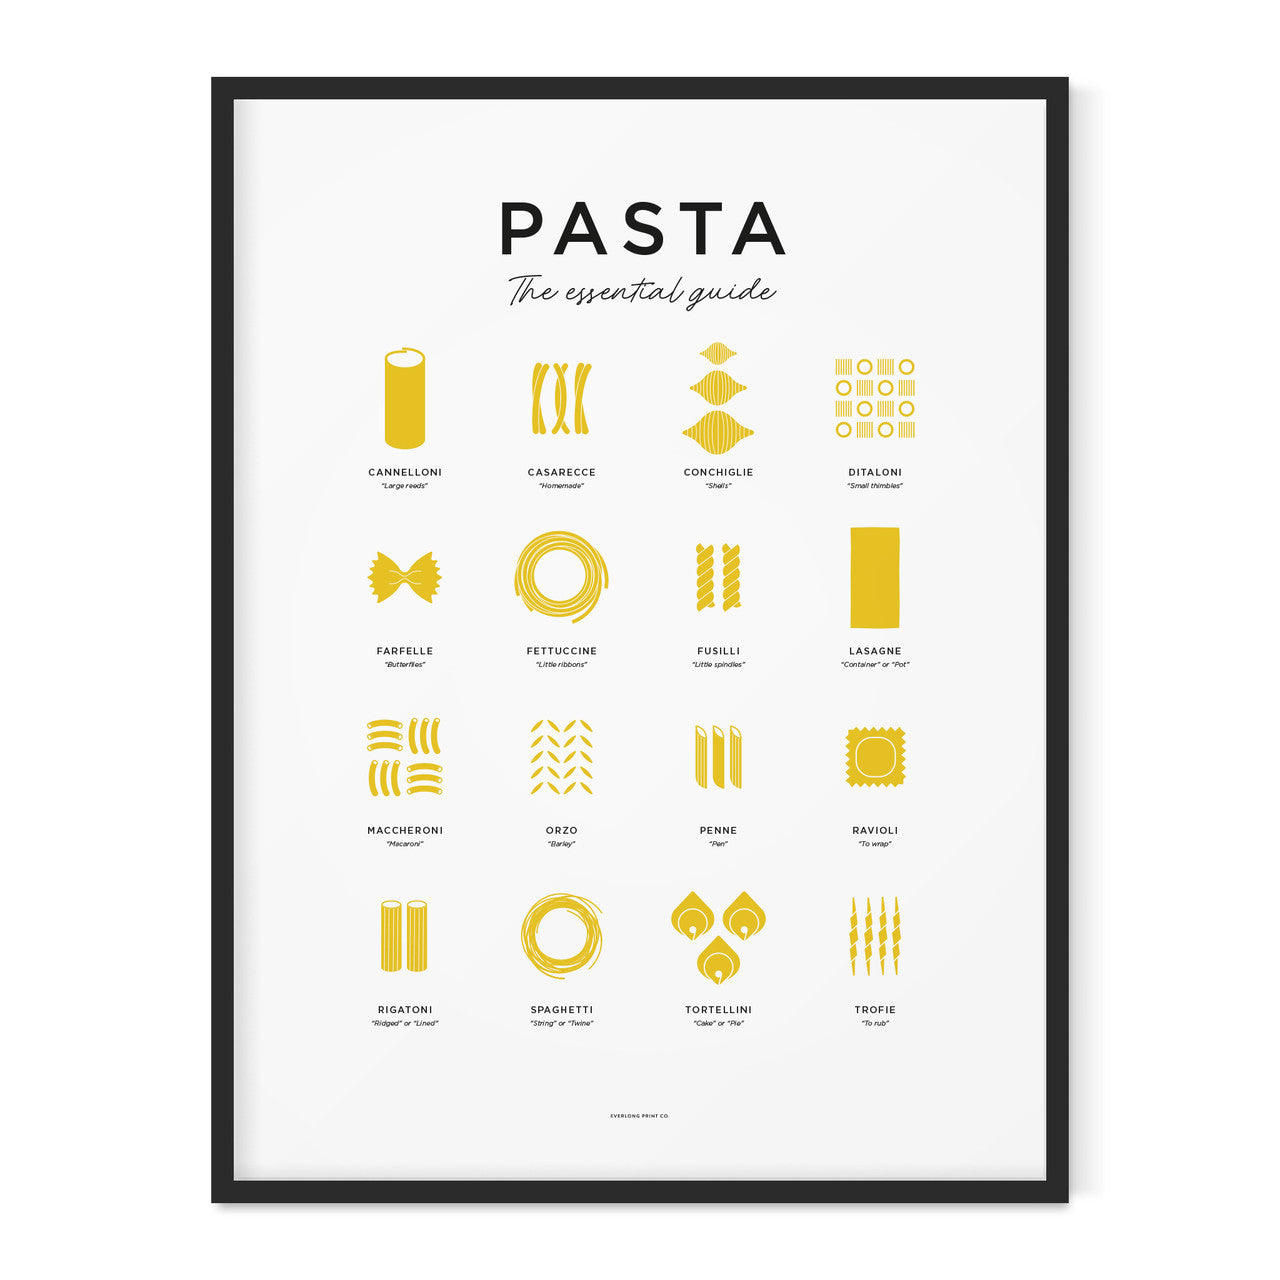 A Picture Guide to Pasta Types